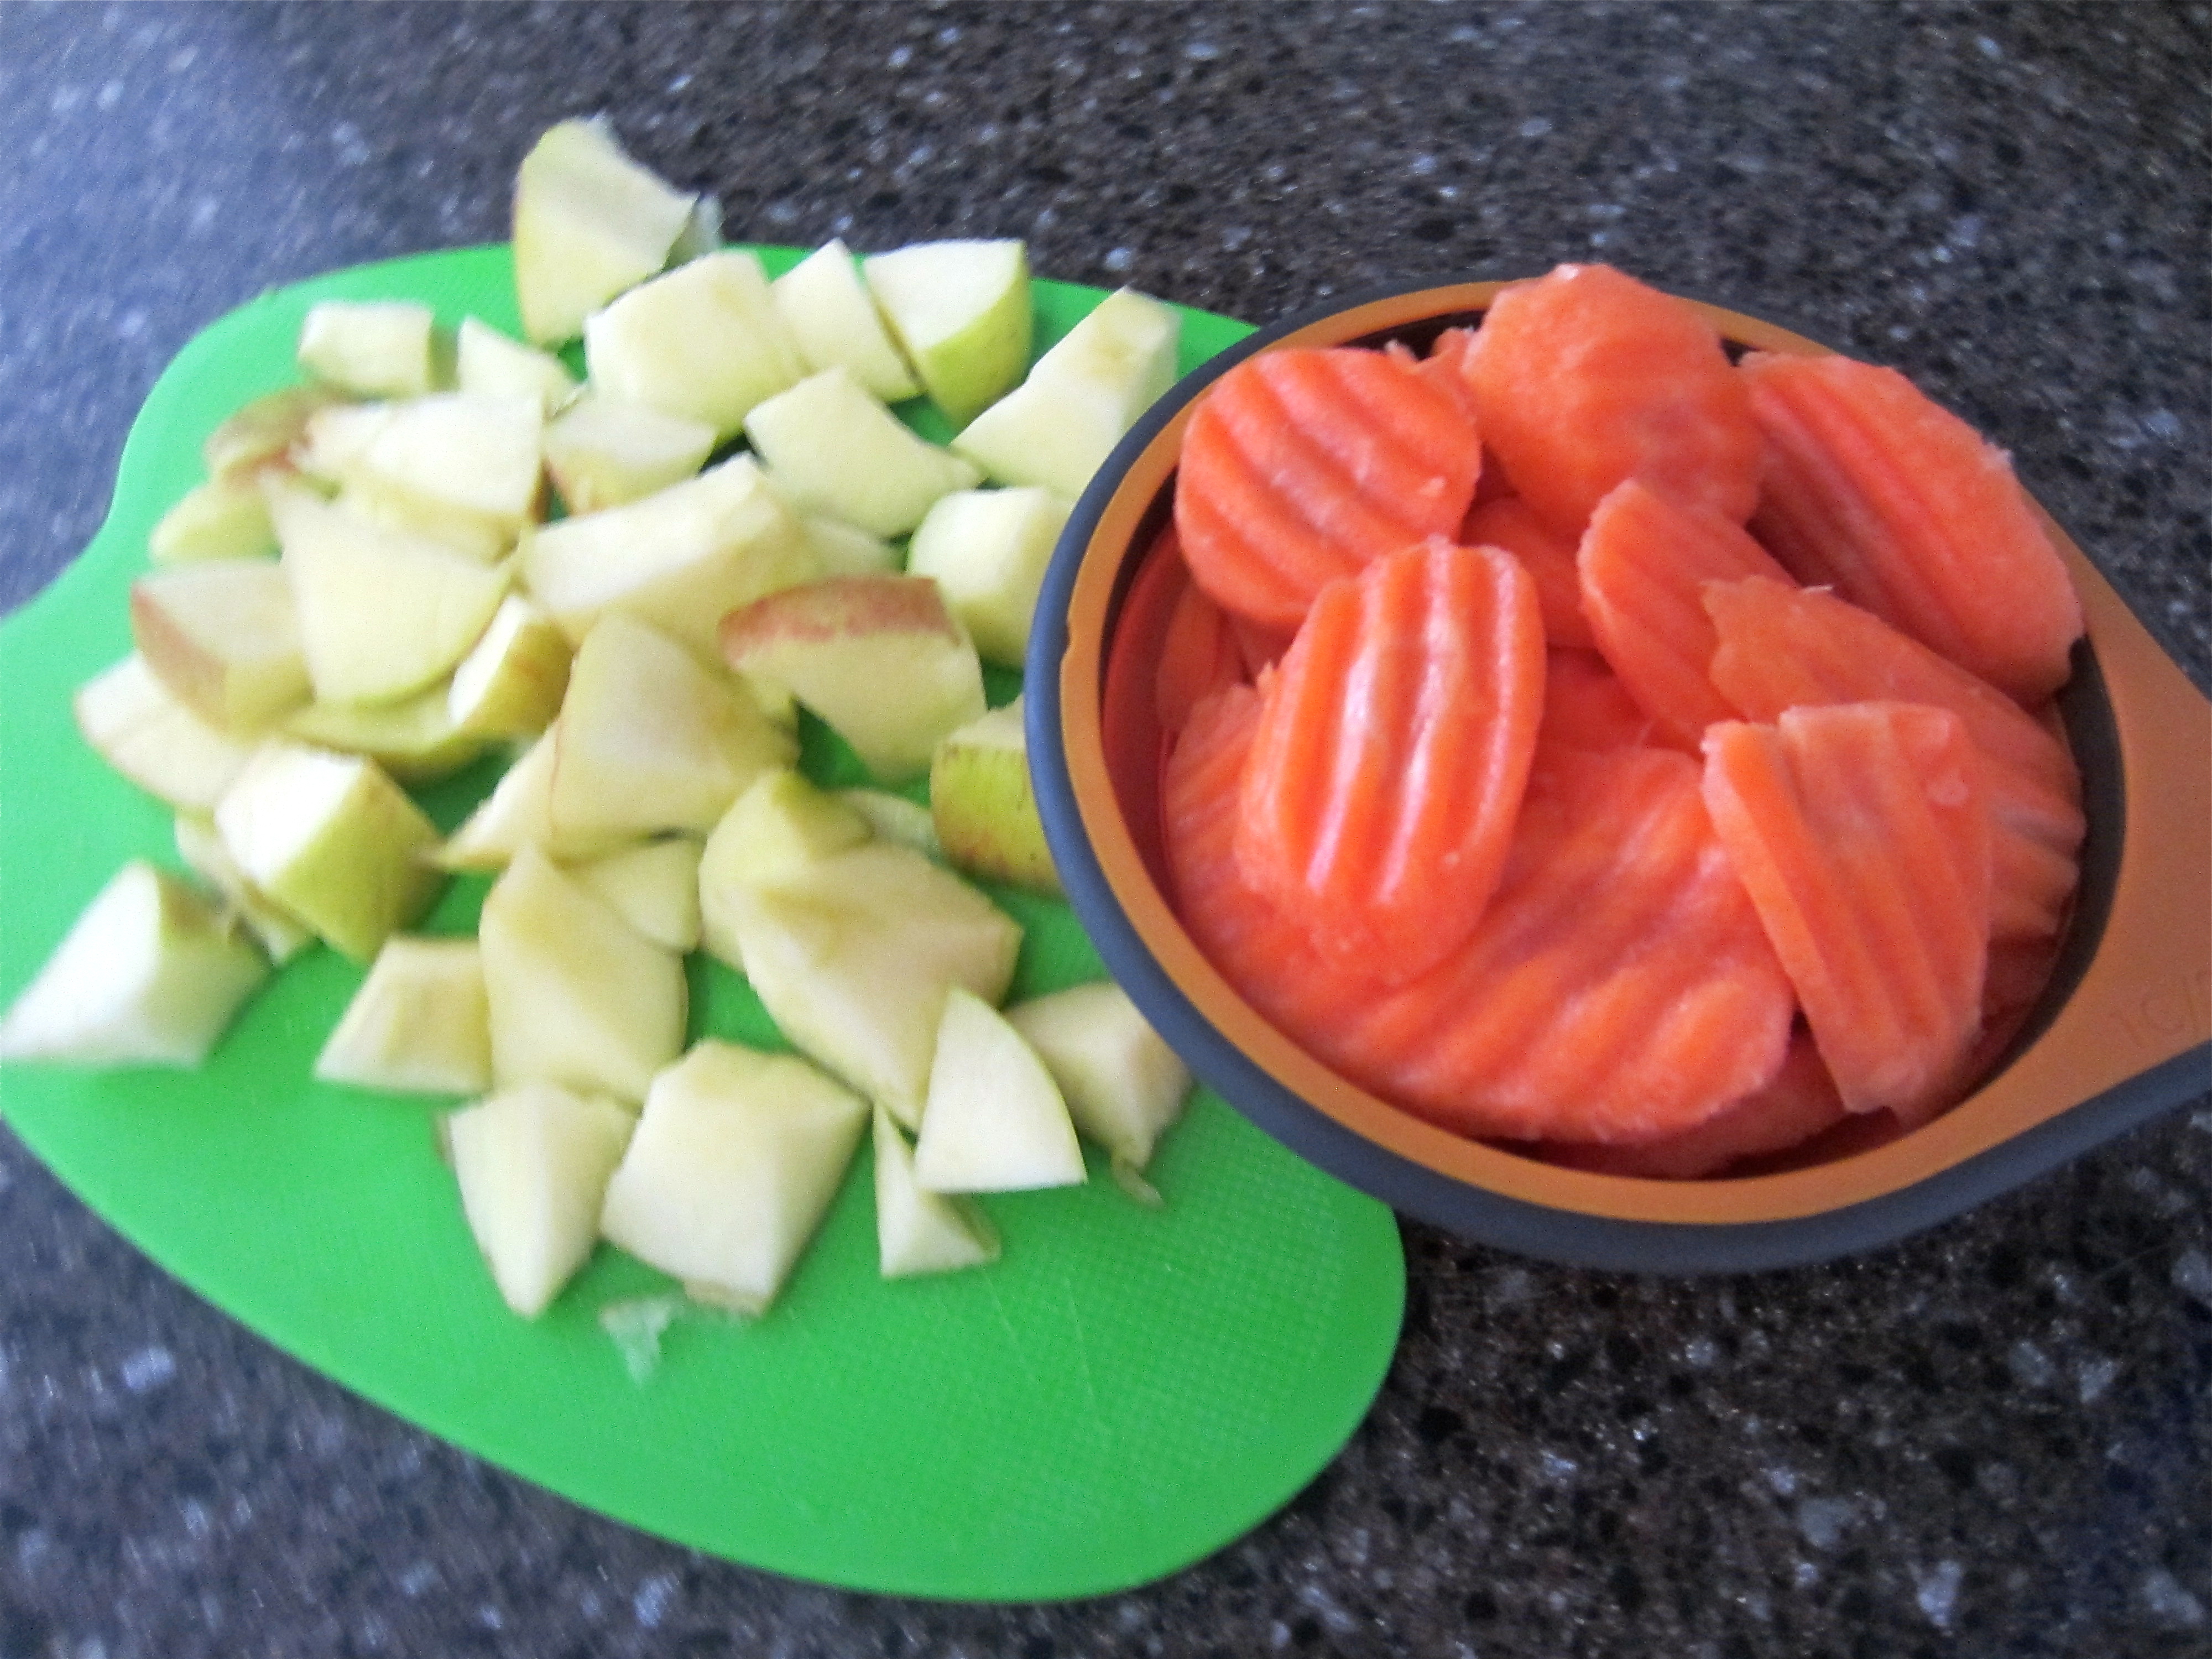 Carrots and Apples